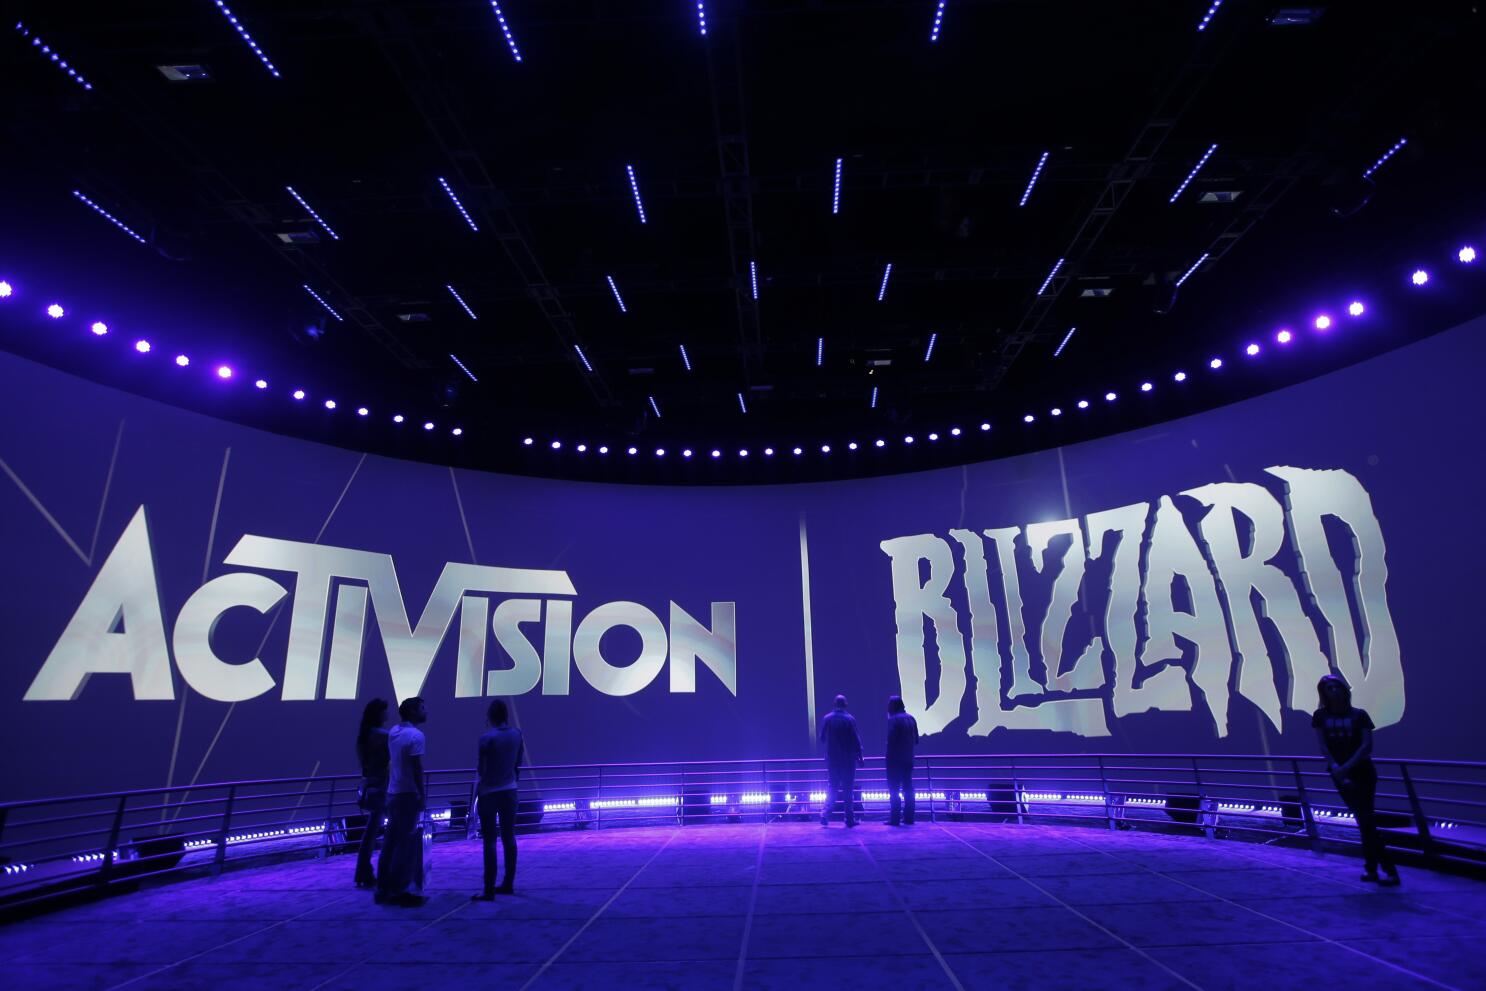 Microsoft-Activision acquisition: What will change after the